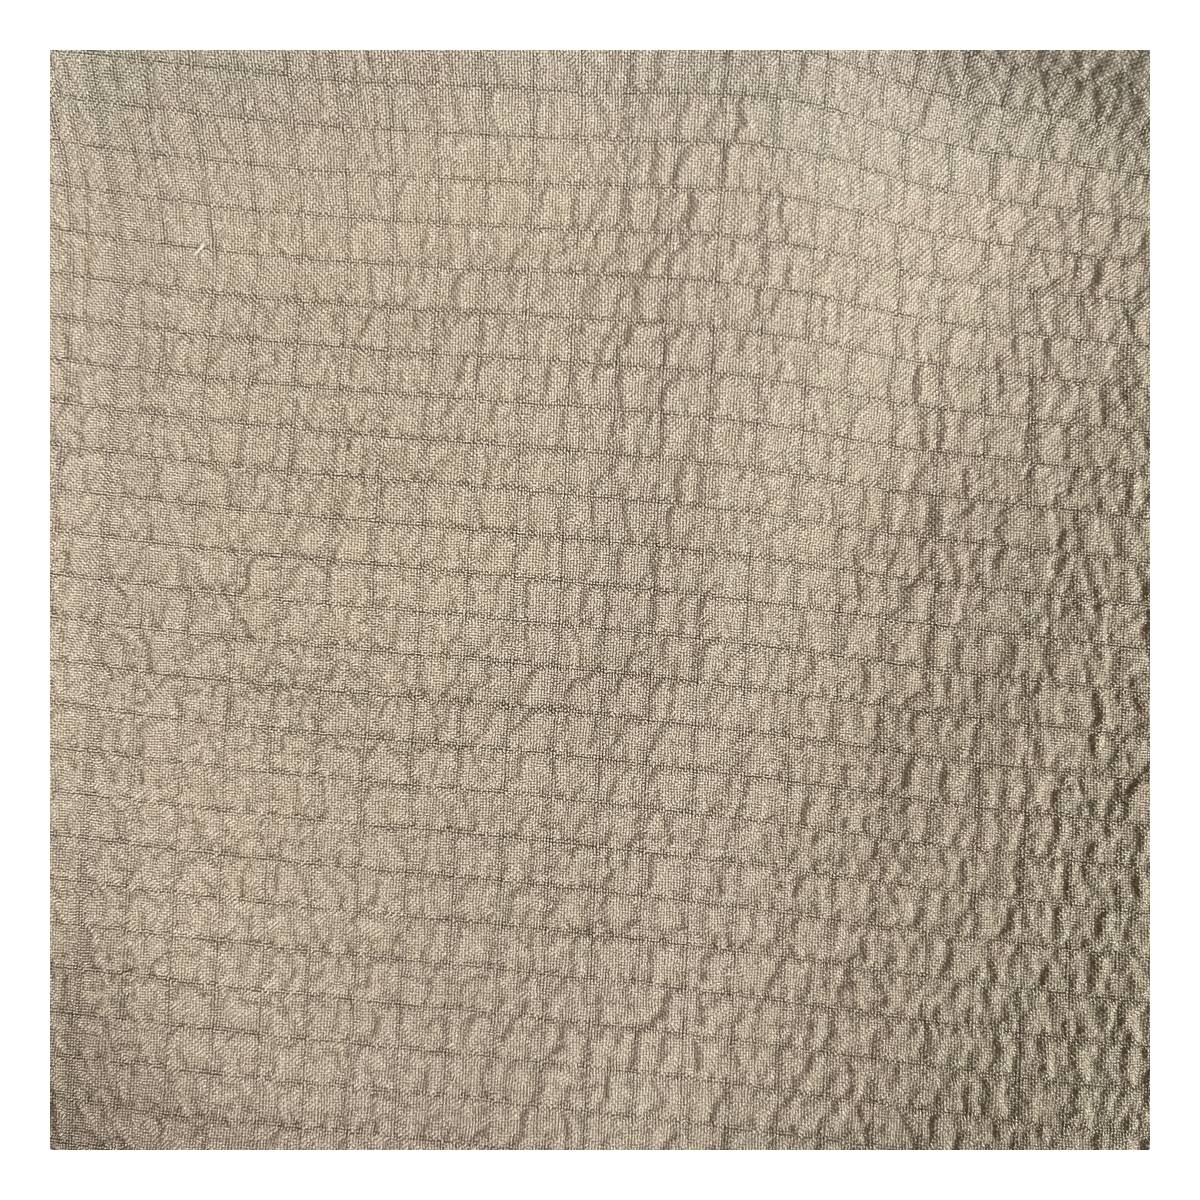 Beige Crinkle Plain Dyed Fabric by the Metre